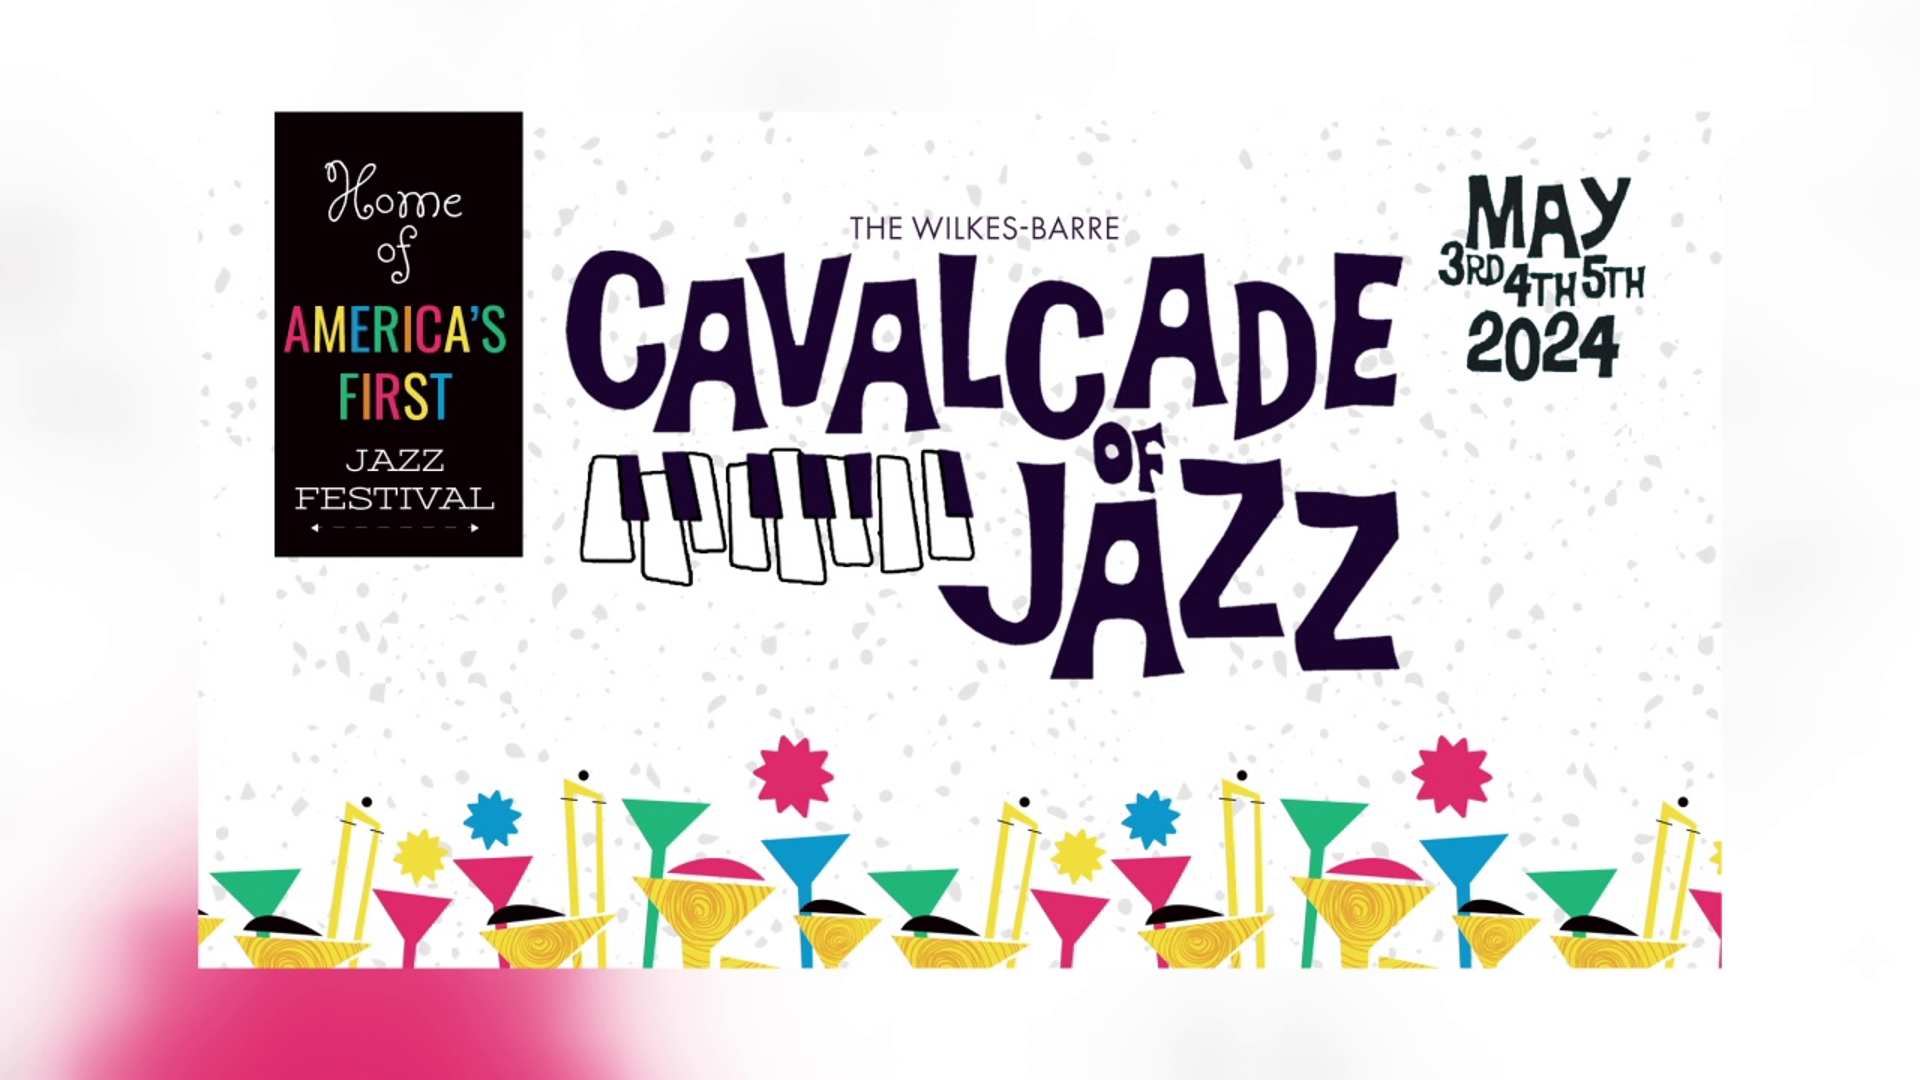 The Wilkes-Barre "Cavalcade of Jazz" will visit downtown Wilkes-Barre from May 3 through May 5, focusing on restaurants, coffee houses, and bars.